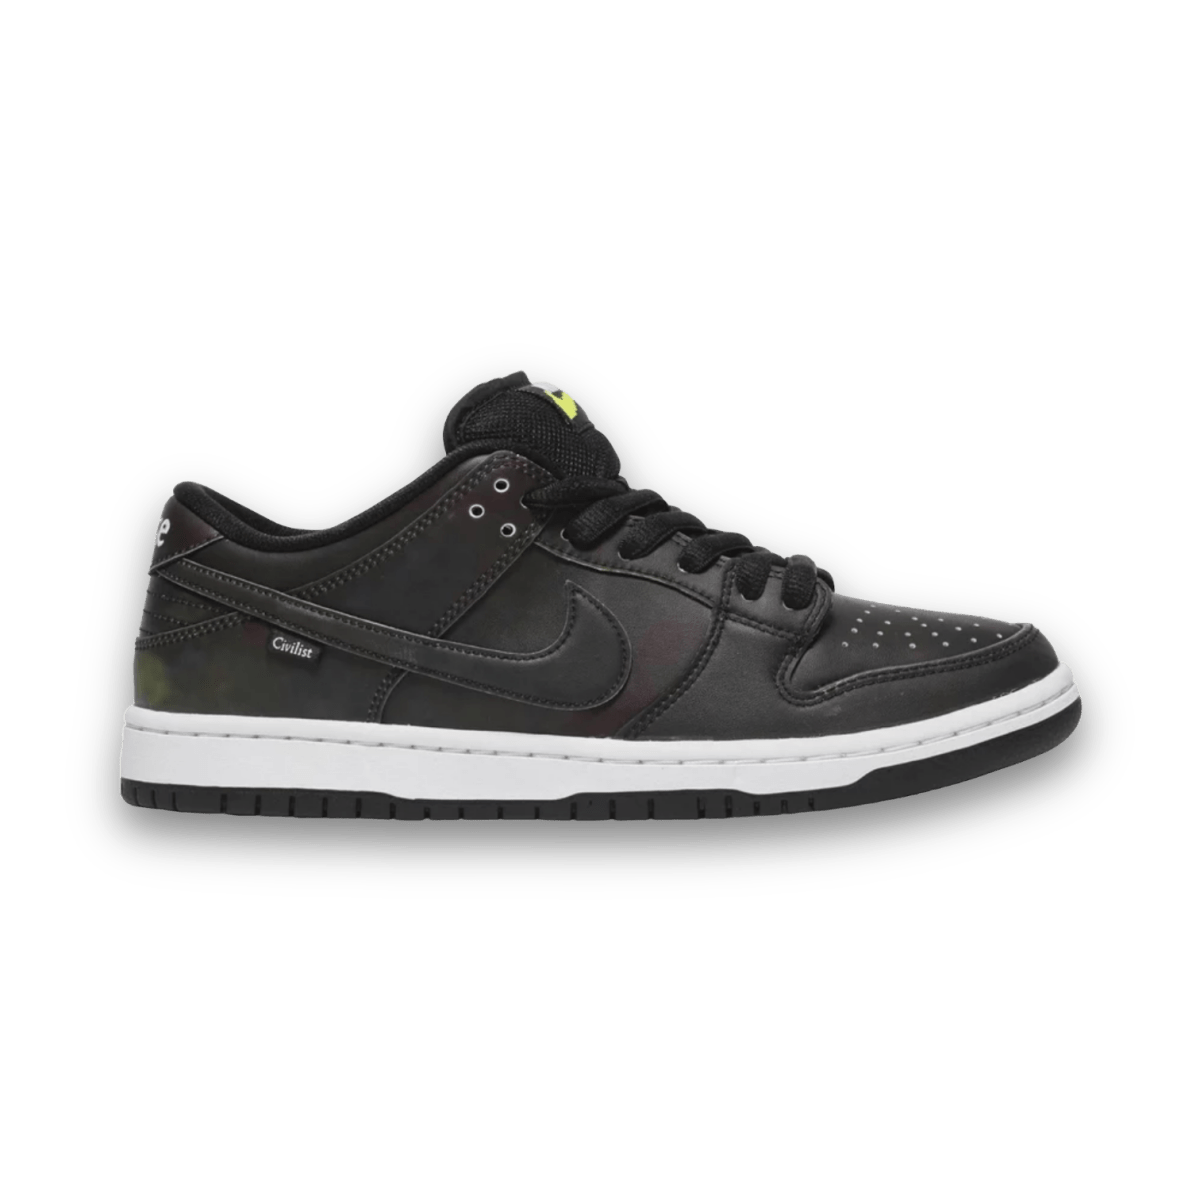 Civilist x Dunk Low Pro SB QS 'Thermography' - Low Sneaker - Dunks - Jawns on Fire - sneakers